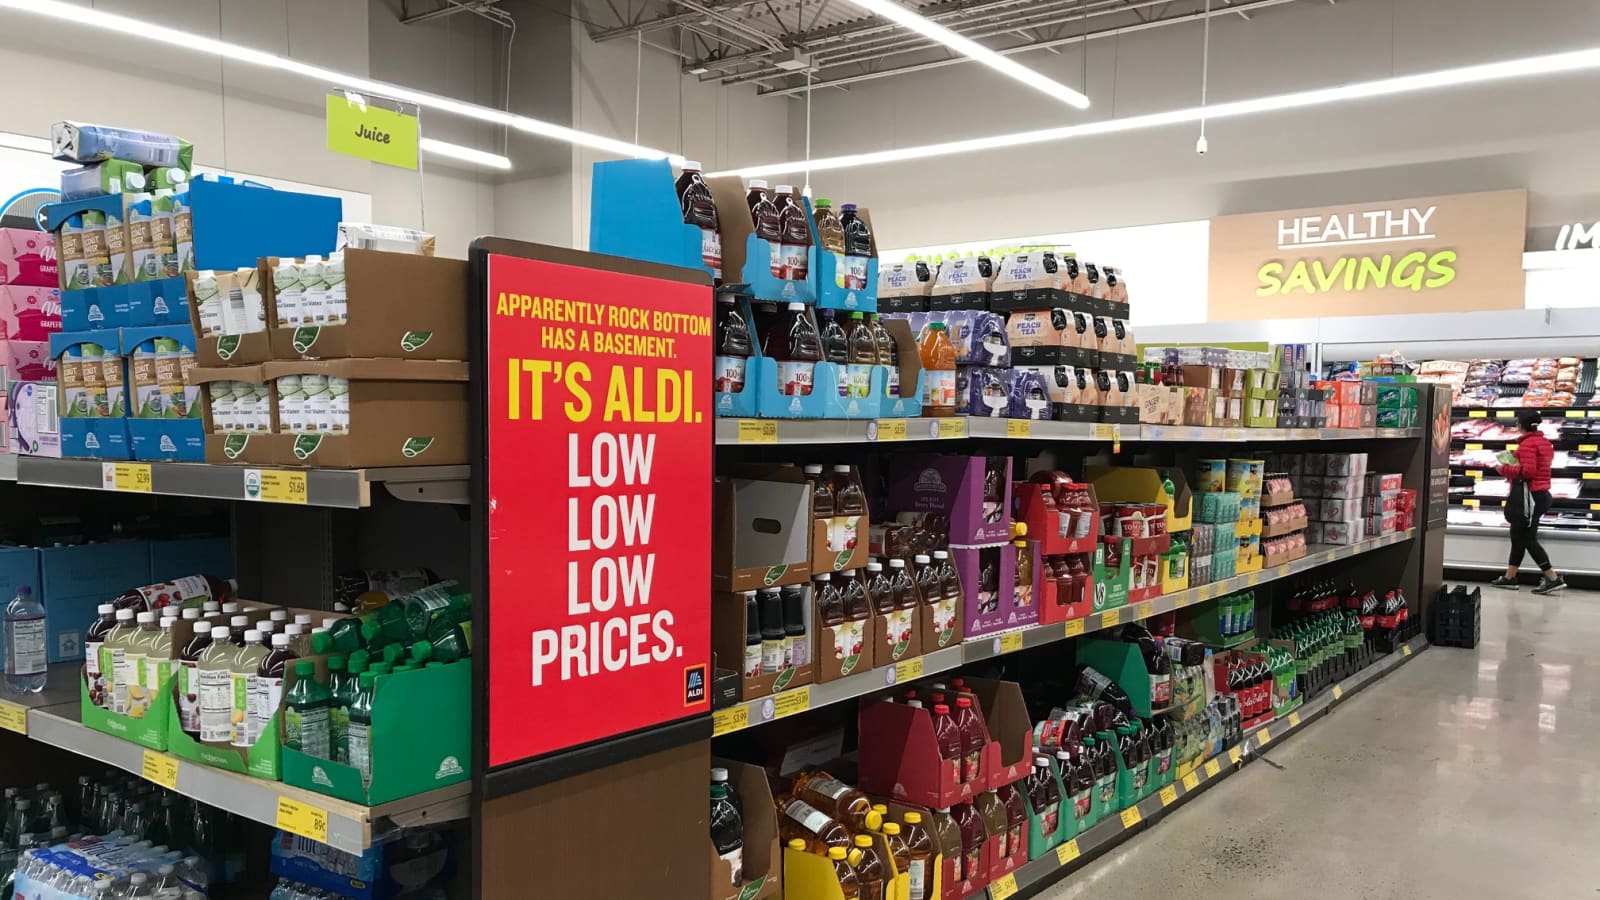 Bargain-priced grocery promotions